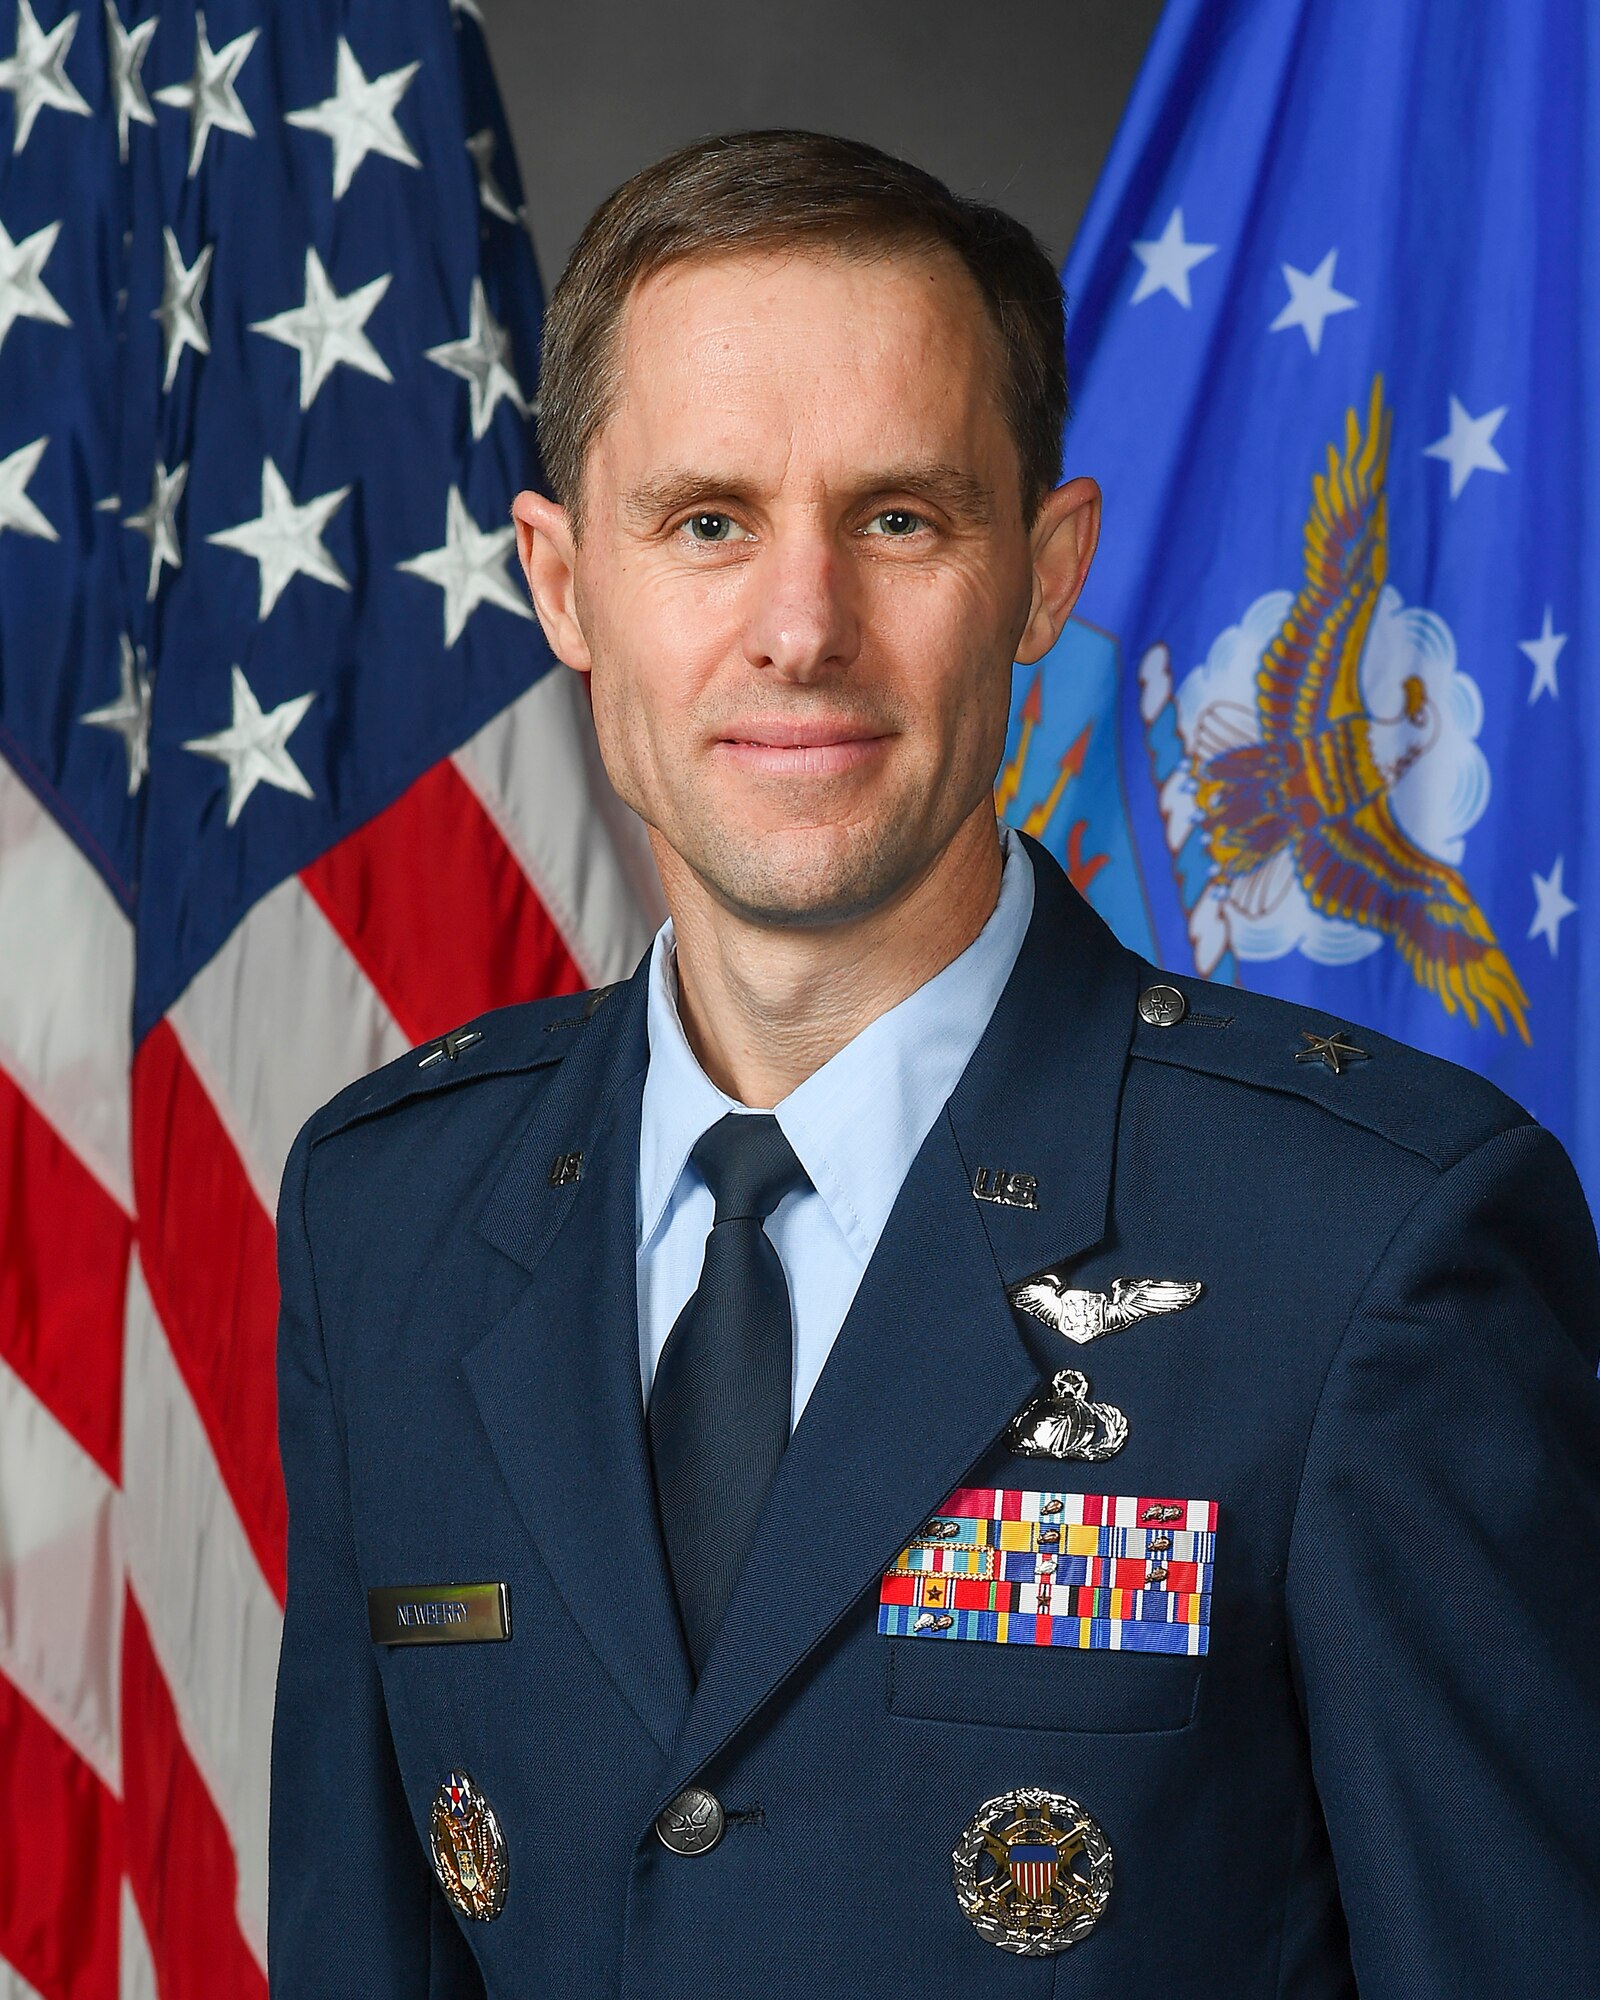 Brig. Gen. John P. Newberry is the Air Force Program Executive Officer for Bombers.